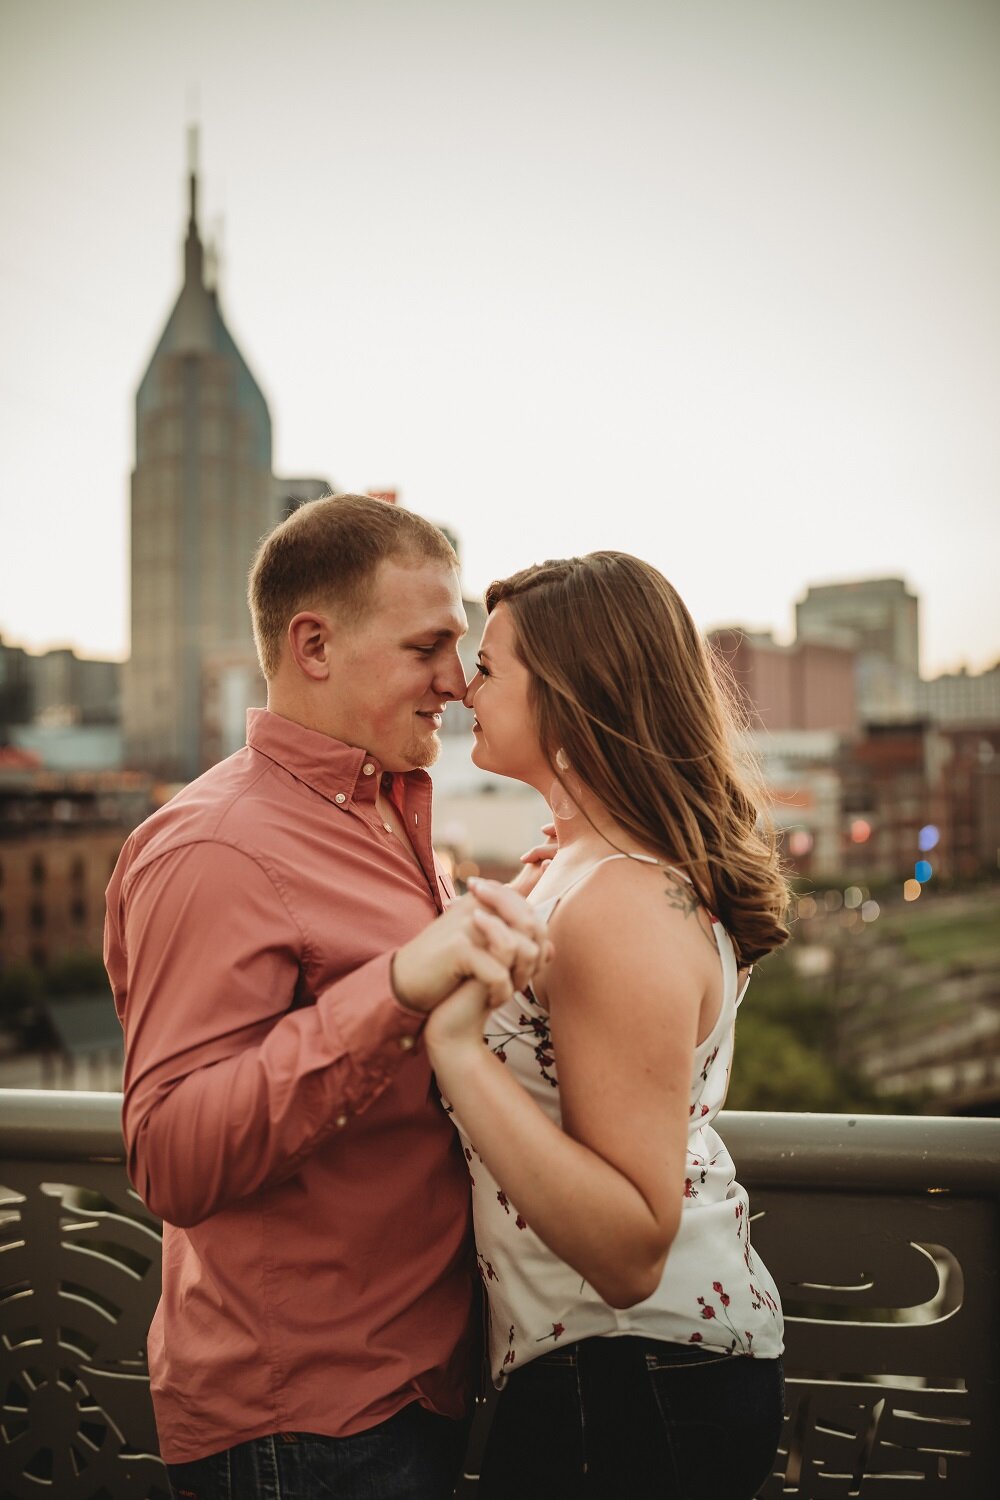 downtown-nashville-engagement-photos-by-oh-deer-photography (4).jpg